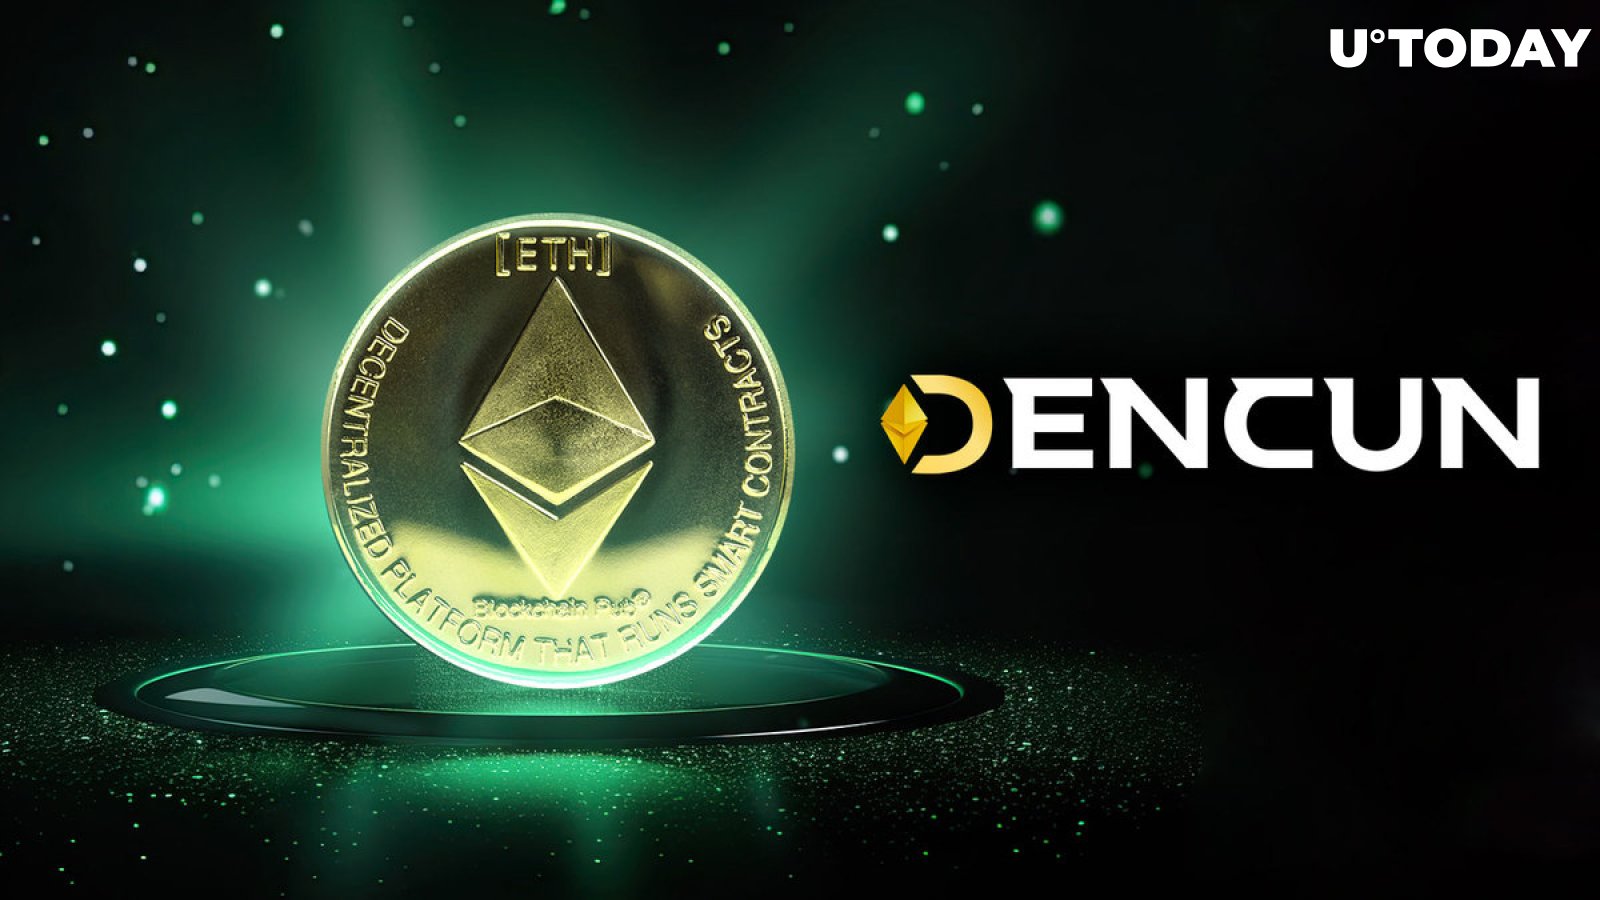 Ethereum (ETH) Fees Skyrocket as Dencun Upgrade Countdown Begins: What to Expect